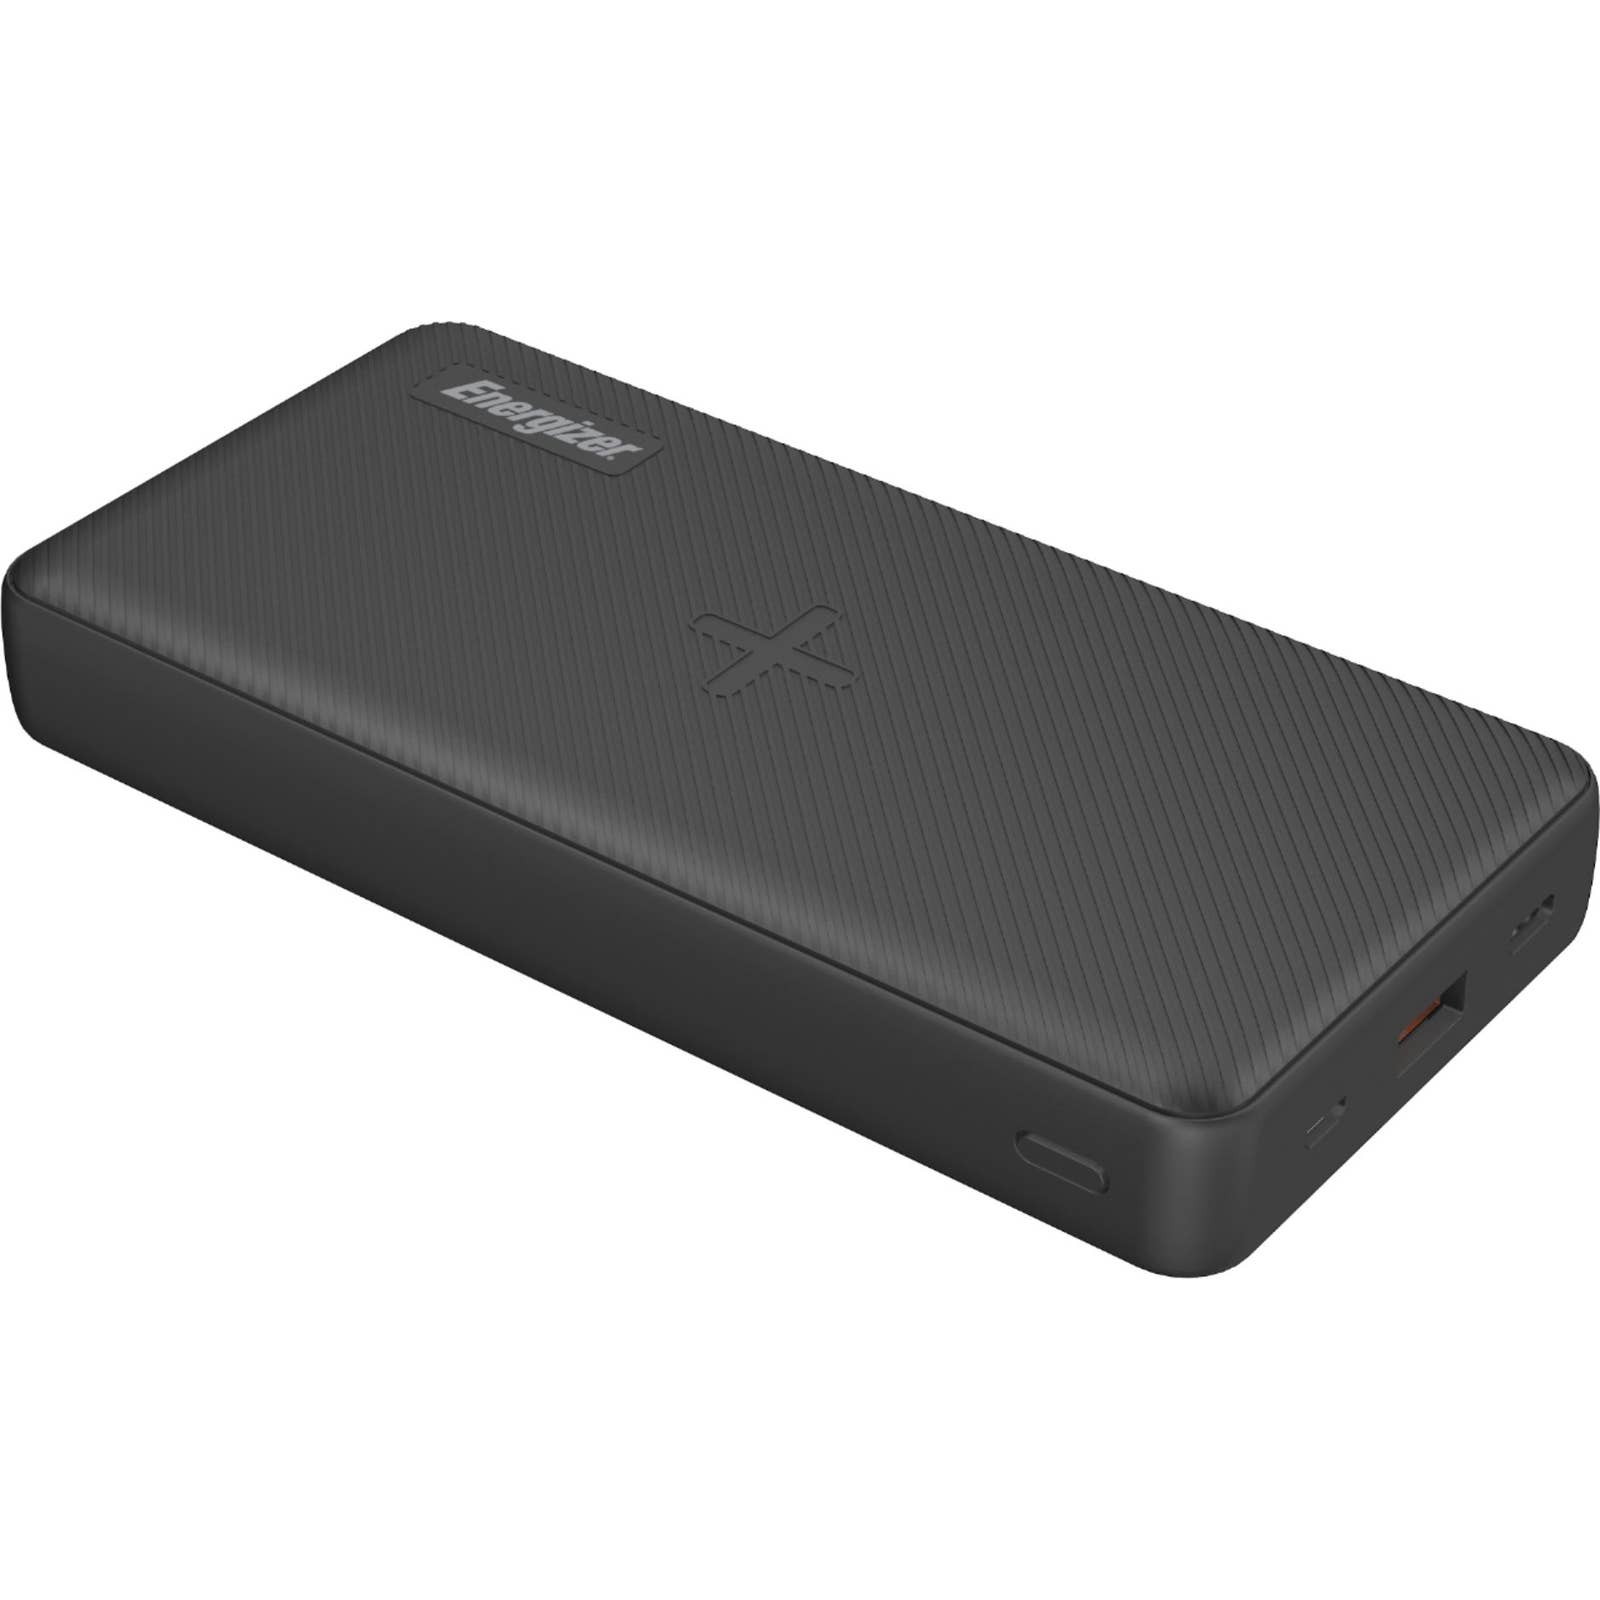 Energizer - QE20044PQ Ultimate Lithium 20,000mAh 20W Qi Wireless Portable Charger/Power Bank QC 3.0 & PD 3.0 for Apple, Android, USB Devices - Black